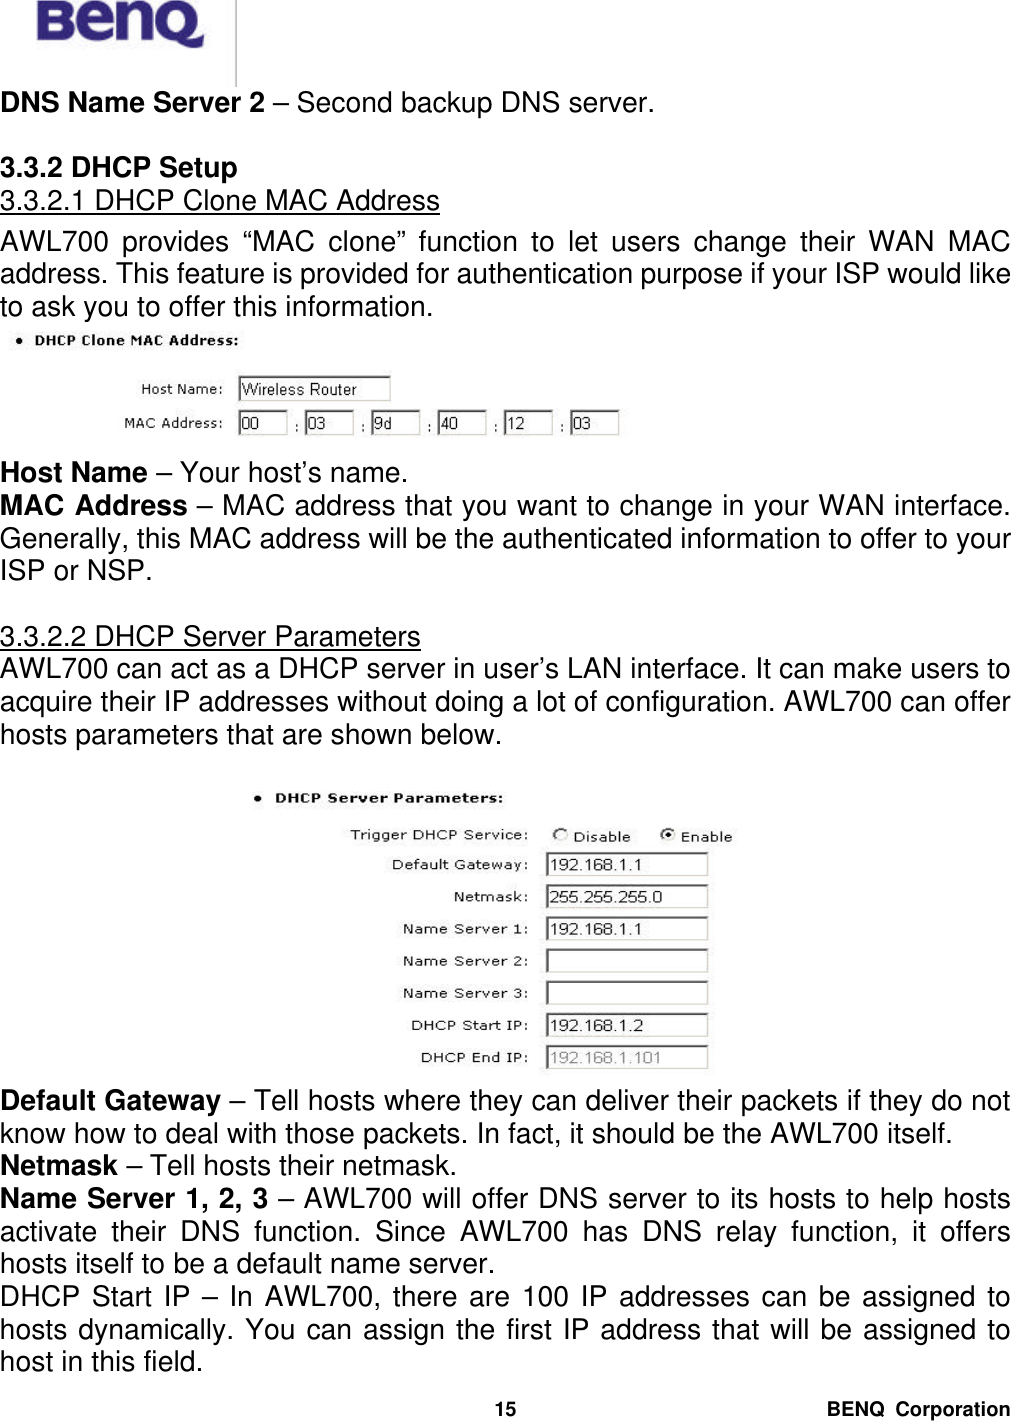  BENQ Corporation 15DNS Name Server 2 – Second backup DNS server.  3.3.2 DHCP Setup 3.3.2.1 DHCP Clone MAC Address AWL700 provides “MAC clone” function to let users change their WAN MAC address. This feature is provided for authentication purpose if your ISP would like to ask you to offer this information.  Host Name – Your host’s name. MAC Address – MAC address that you want to change in your WAN interface. Generally, this MAC address will be the authenticated information to offer to your ISP or NSP.  3.3.2.2 DHCP Server Parameters AWL700 can act as a DHCP server in user’s LAN interface. It can make users to acquire their IP addresses without doing a lot of configuration. AWL700 can offer hosts parameters that are shown below.   Default Gateway – Tell hosts where they can deliver their packets if they do not know how to deal with those packets. In fact, it should be the AWL700 itself. Netmask – Tell hosts their netmask. Name Server 1, 2, 3 – AWL700 will offer DNS server to its hosts to help hosts activate their DNS function. Since AWL700 has DNS relay function, it offers hosts itself to be a default name server. DHCP Start IP – In AWL700, there are 100 IP addresses can be assigned to hosts dynamically. You can assign the first IP address that will be assigned to host in this field. 